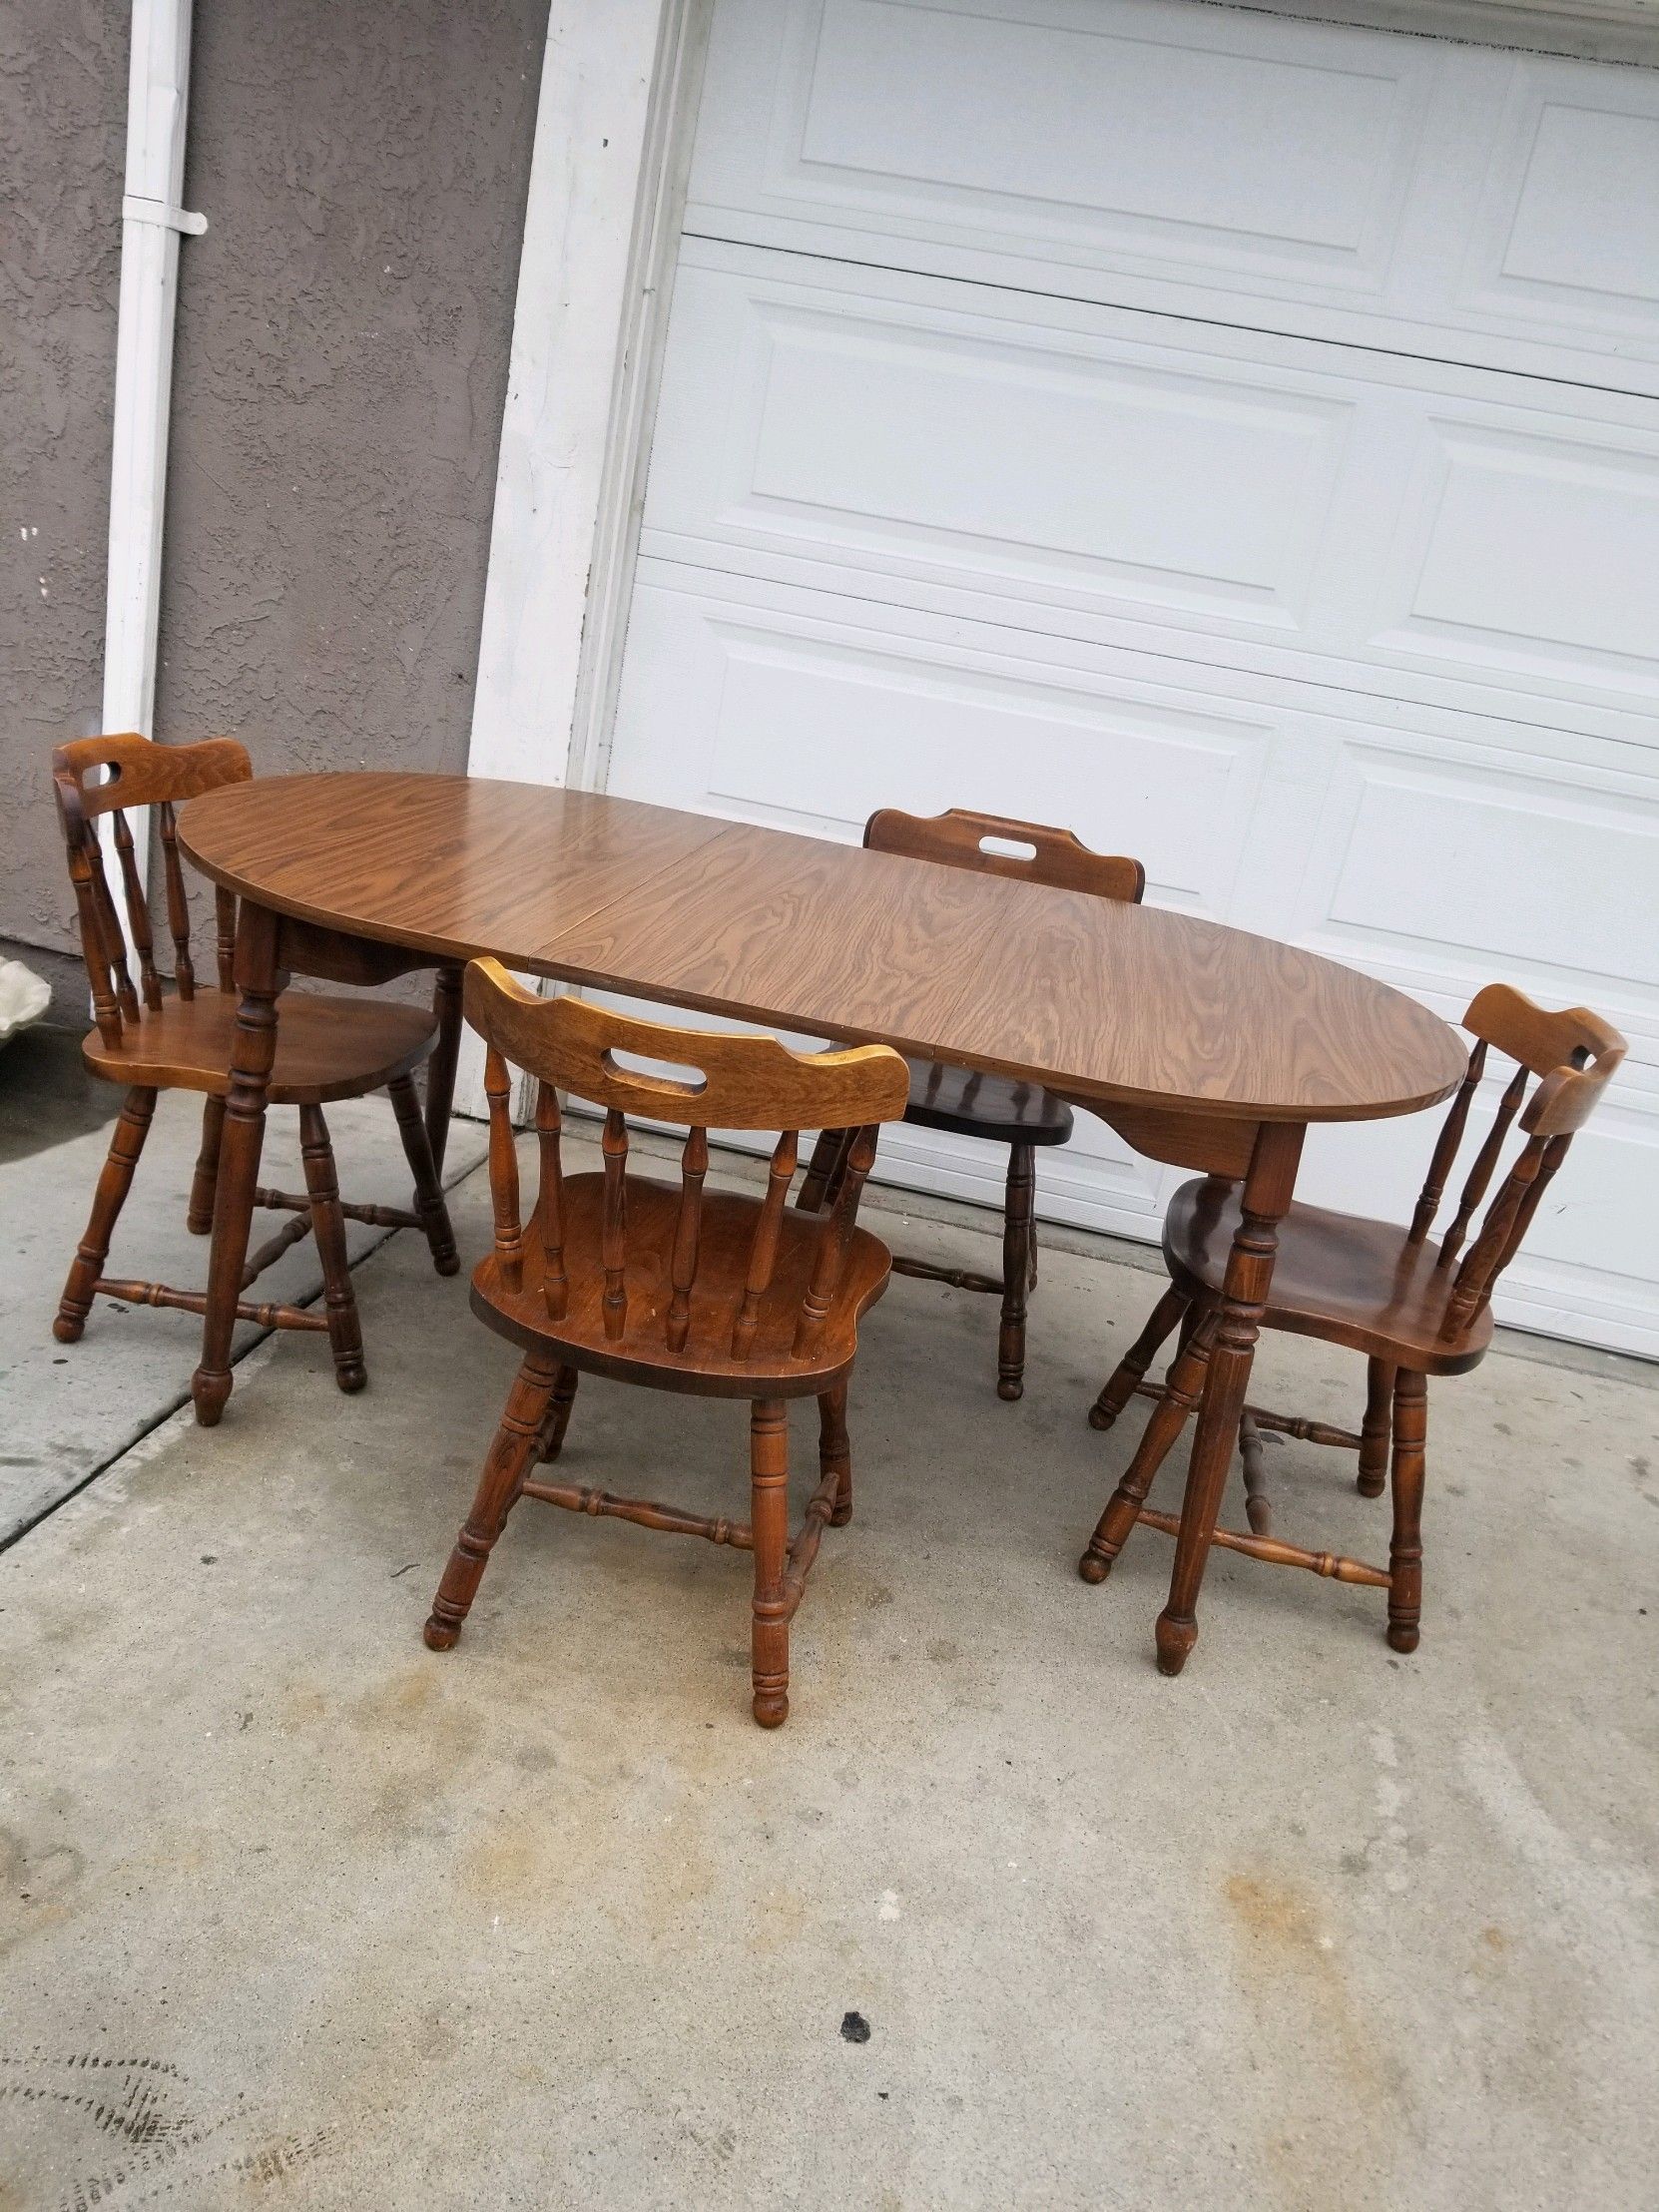 Dining table with 4 chairs in exelent condition